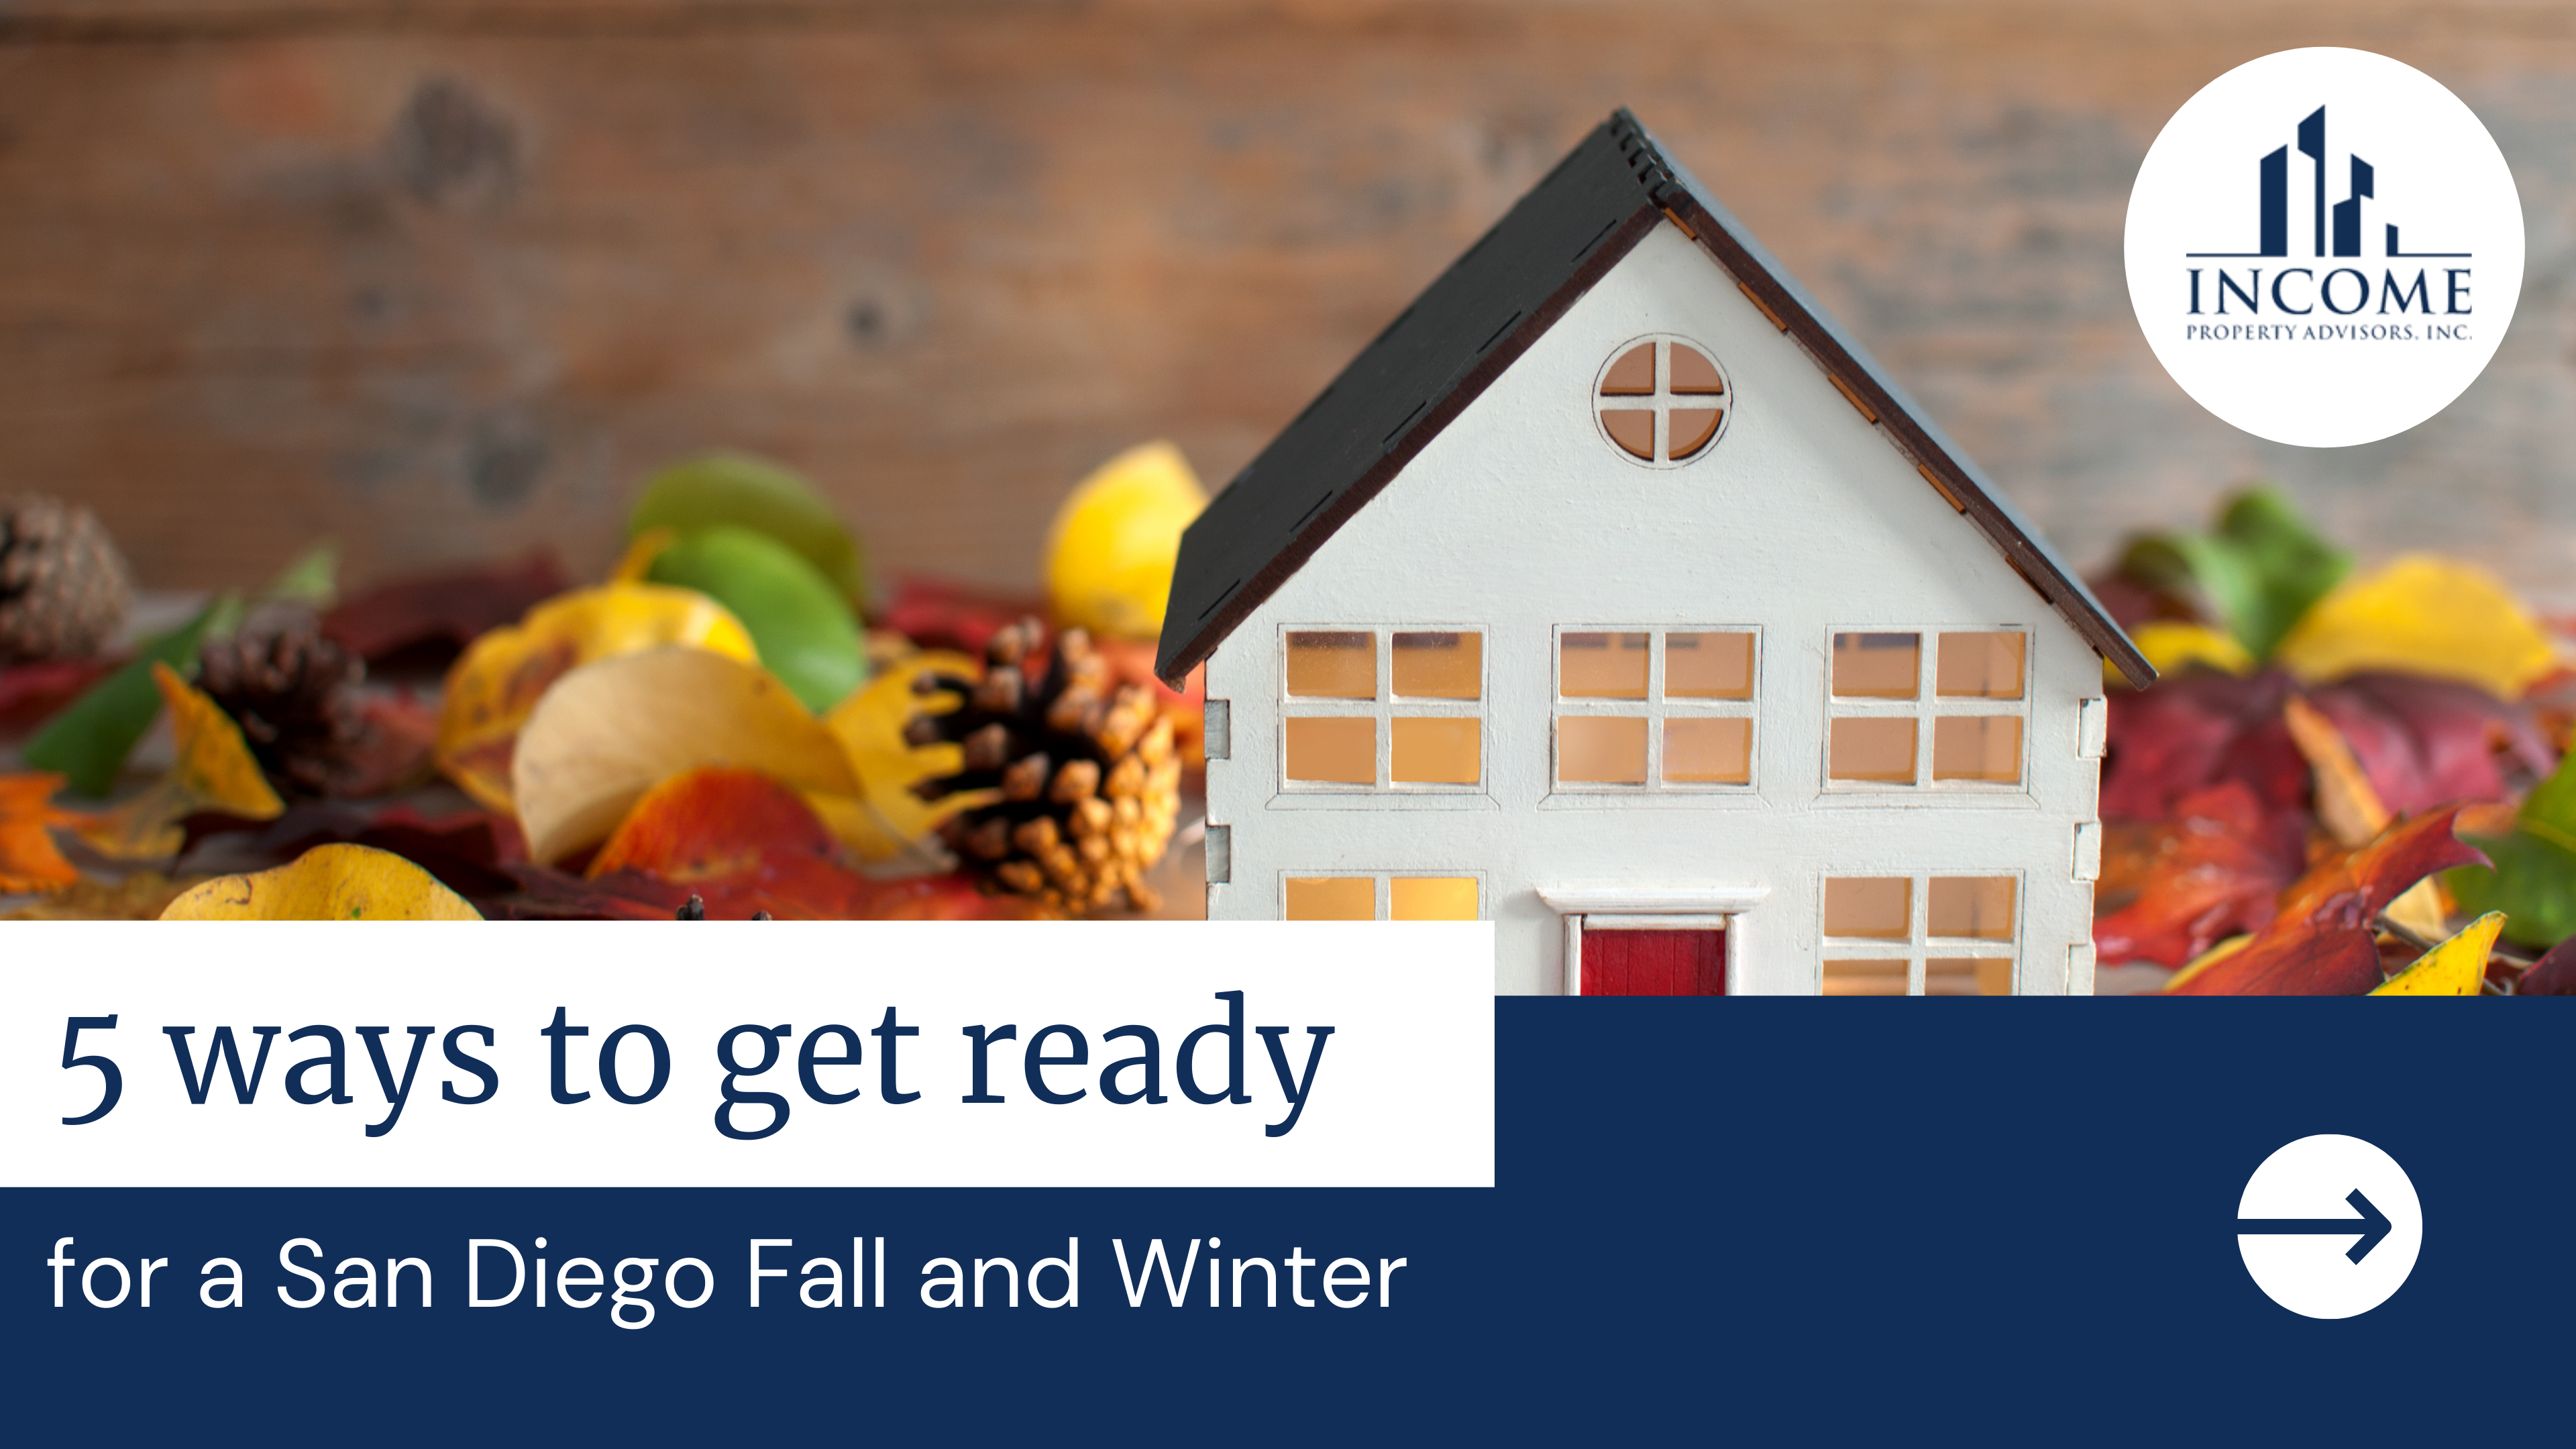 5 ways to get ready for a San Diego Fall and Winter